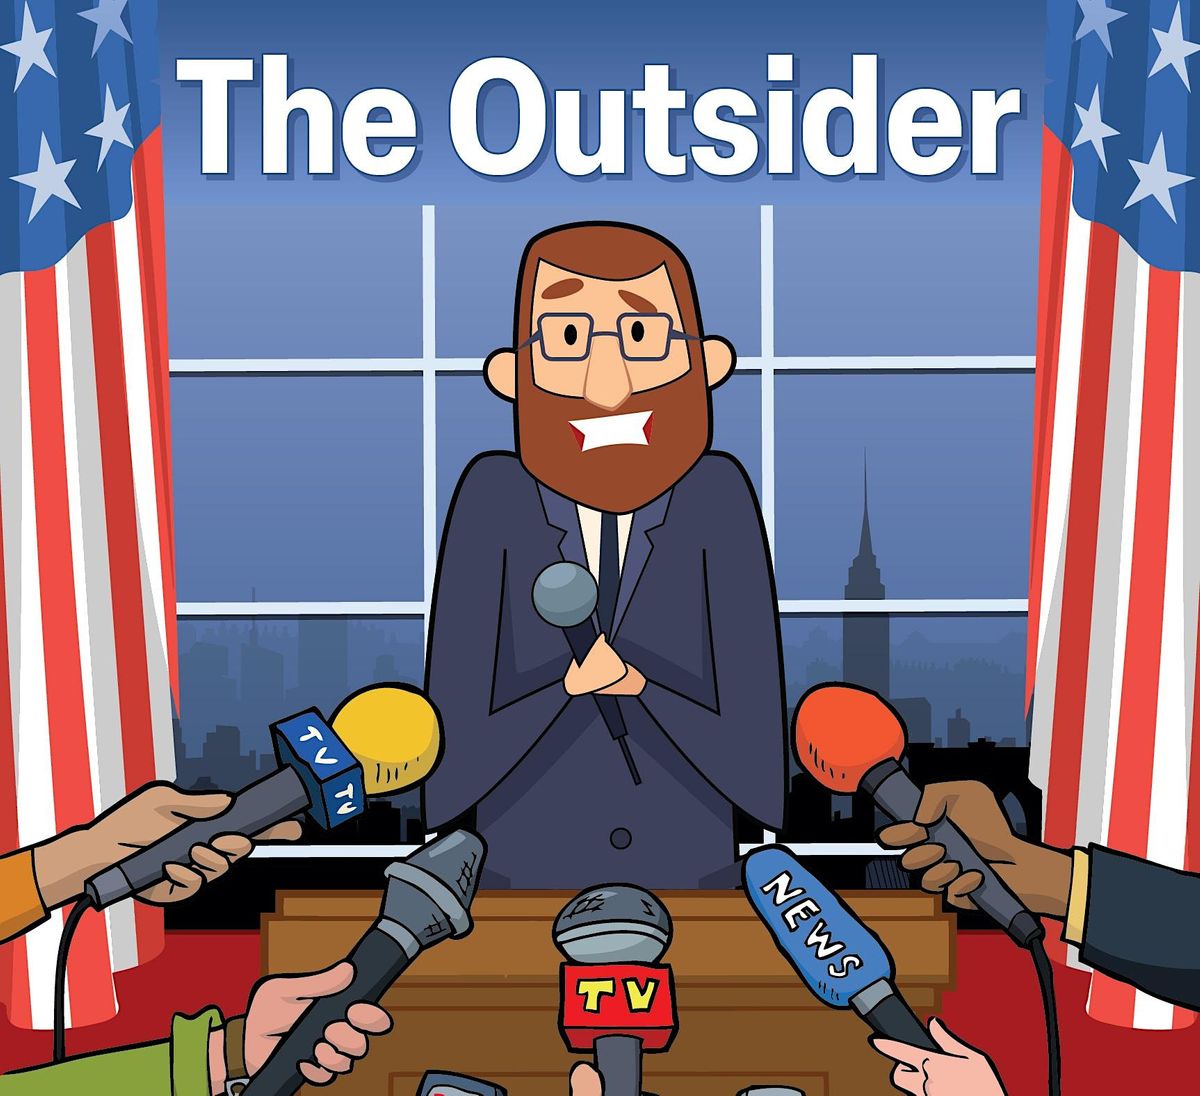 THE OUTSIDER - HILARIOUS COMEDY ABOUT A HOPELESS POLITICIAN